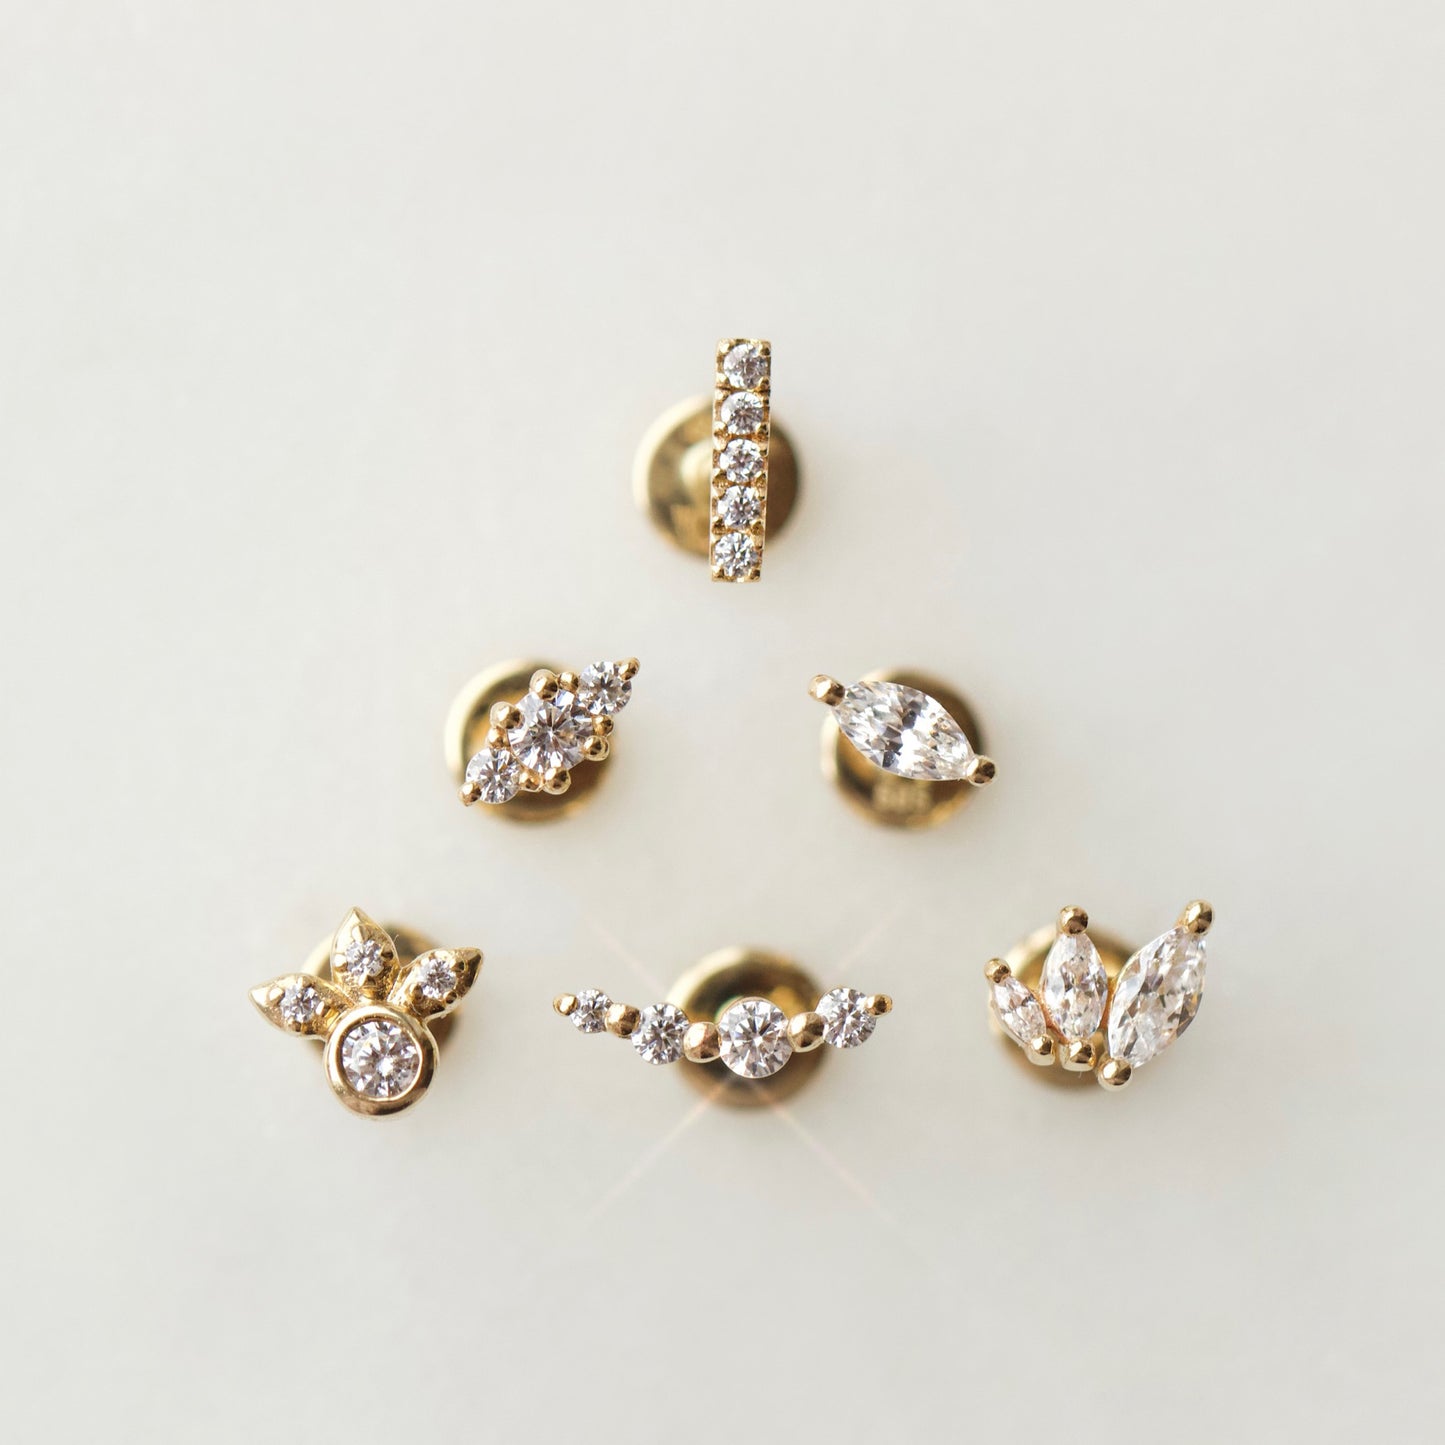 Meaningful solid gold earrings crafted by Carrie Elizabeth Jewellery 